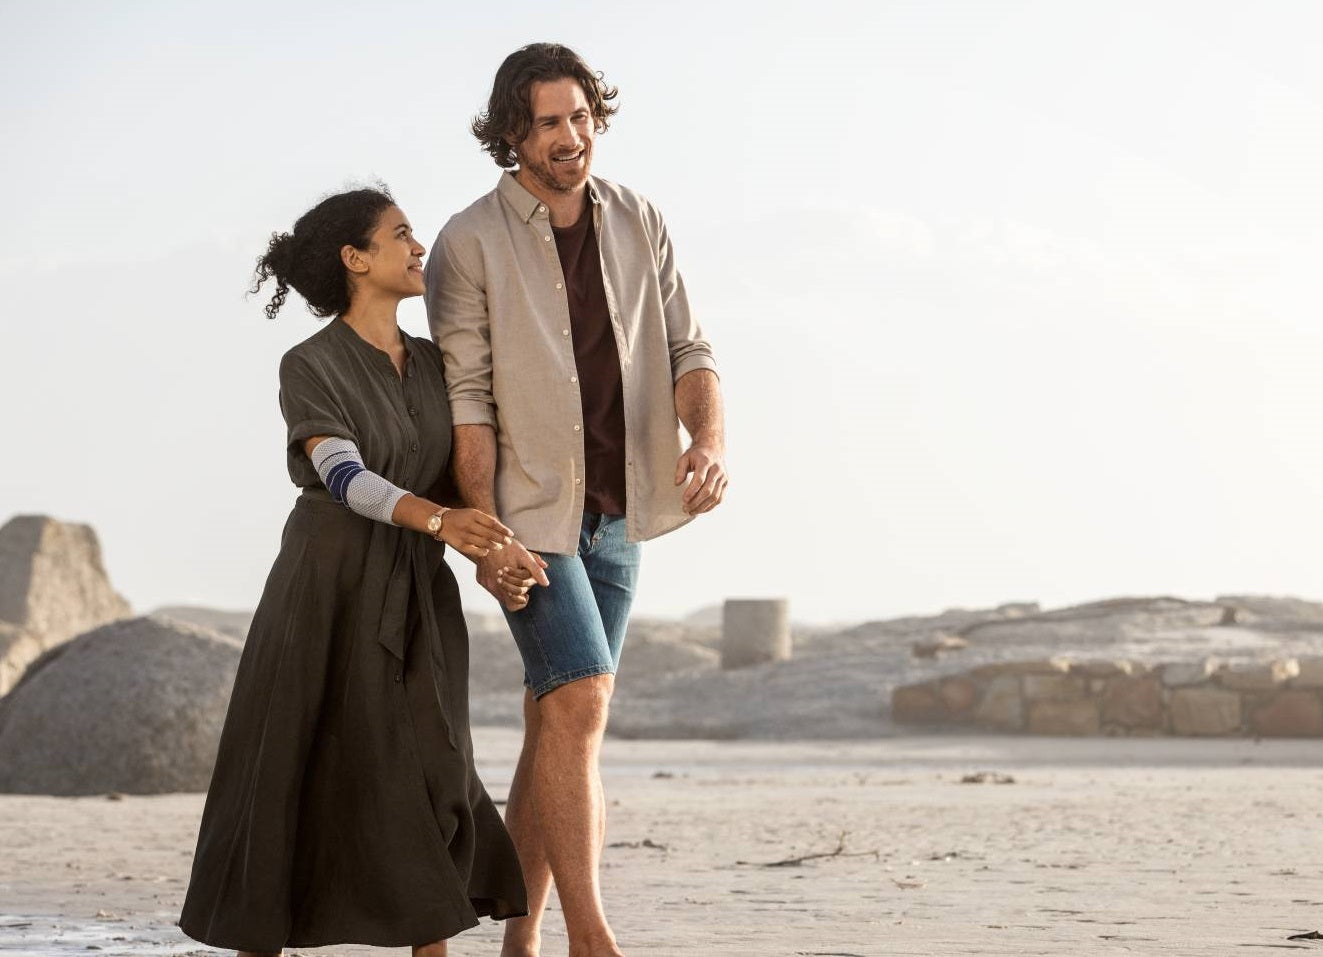 Man and woman walking on the beach, holding hands and talking. The woman is wearing Bauerfeind's EpiTrain elbow brace